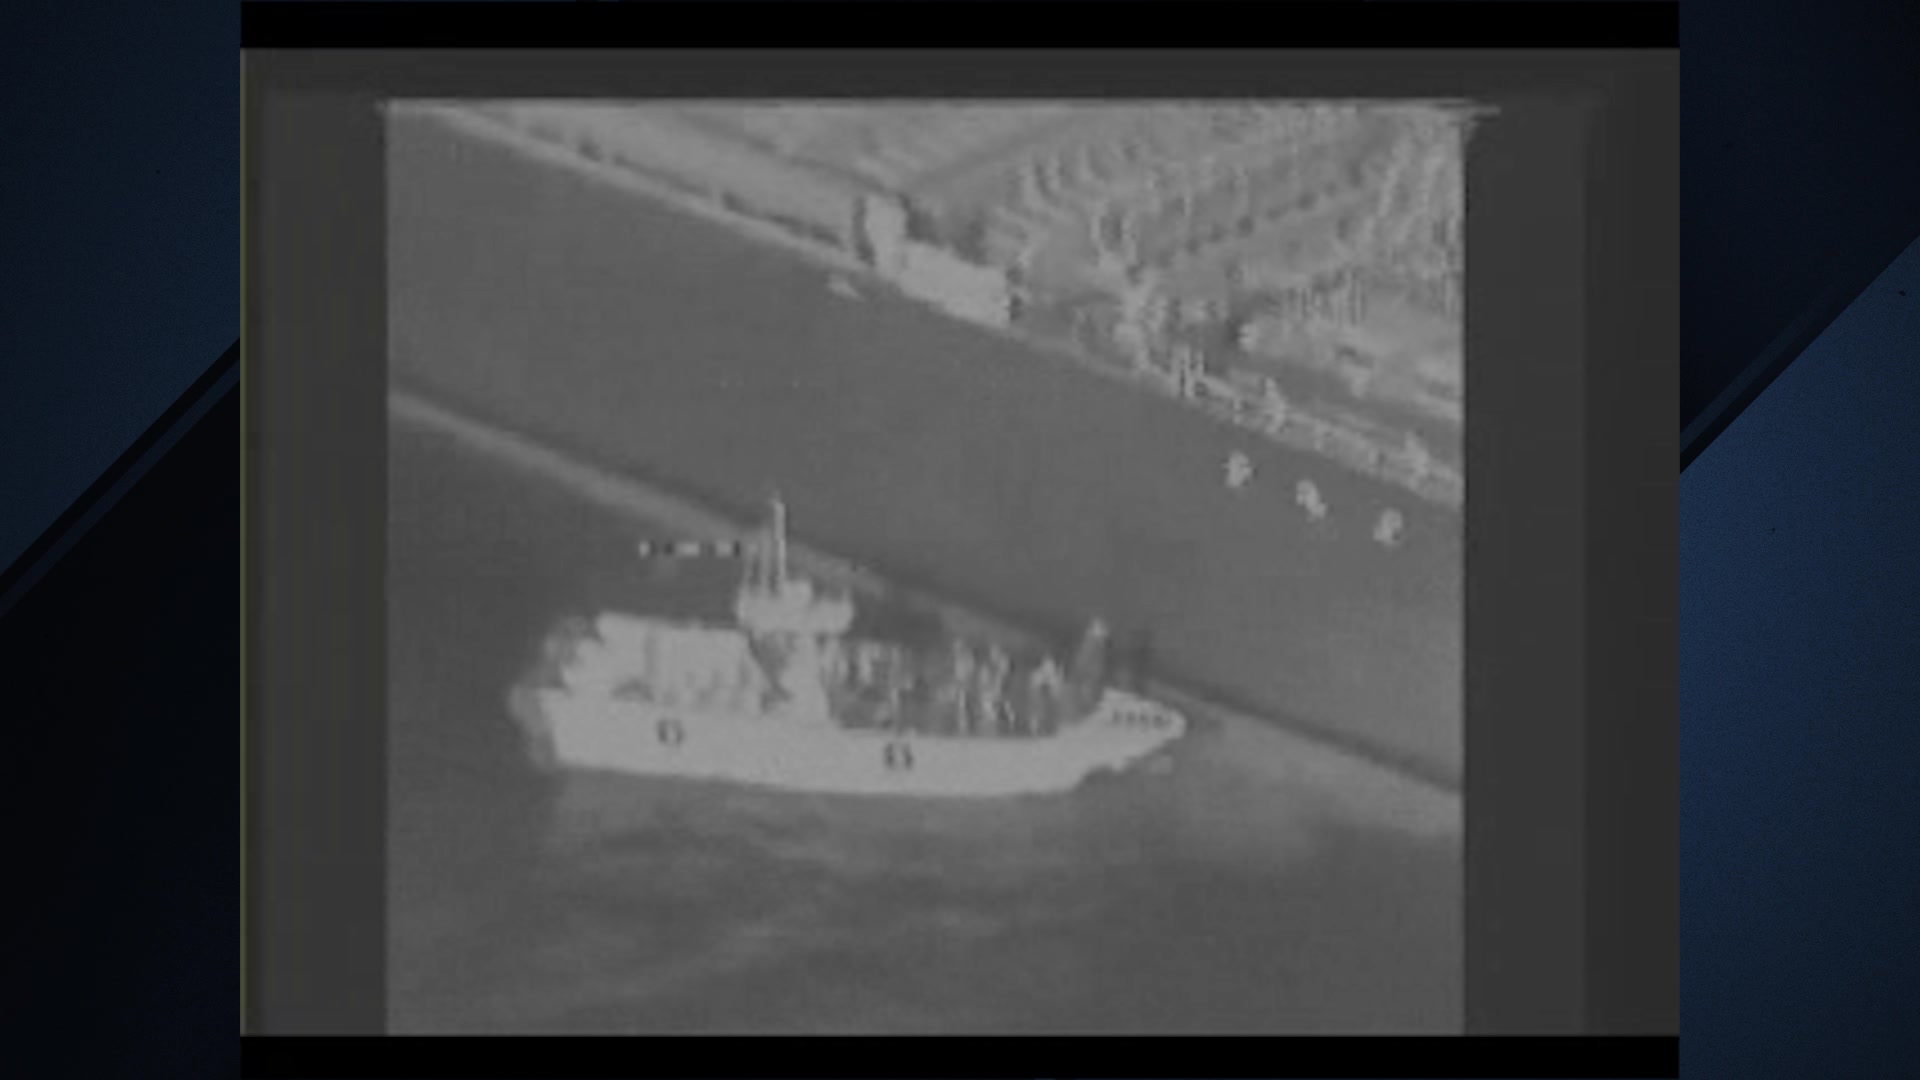 Video released by U.S. Central Command officials shows an Islamic Revolutionary Guard Corps patrol boat crew removing an unexploded limpet mine from the oil tanker M/T Kokuka Courageous in the Gulf of Oman, June 13, 2019.